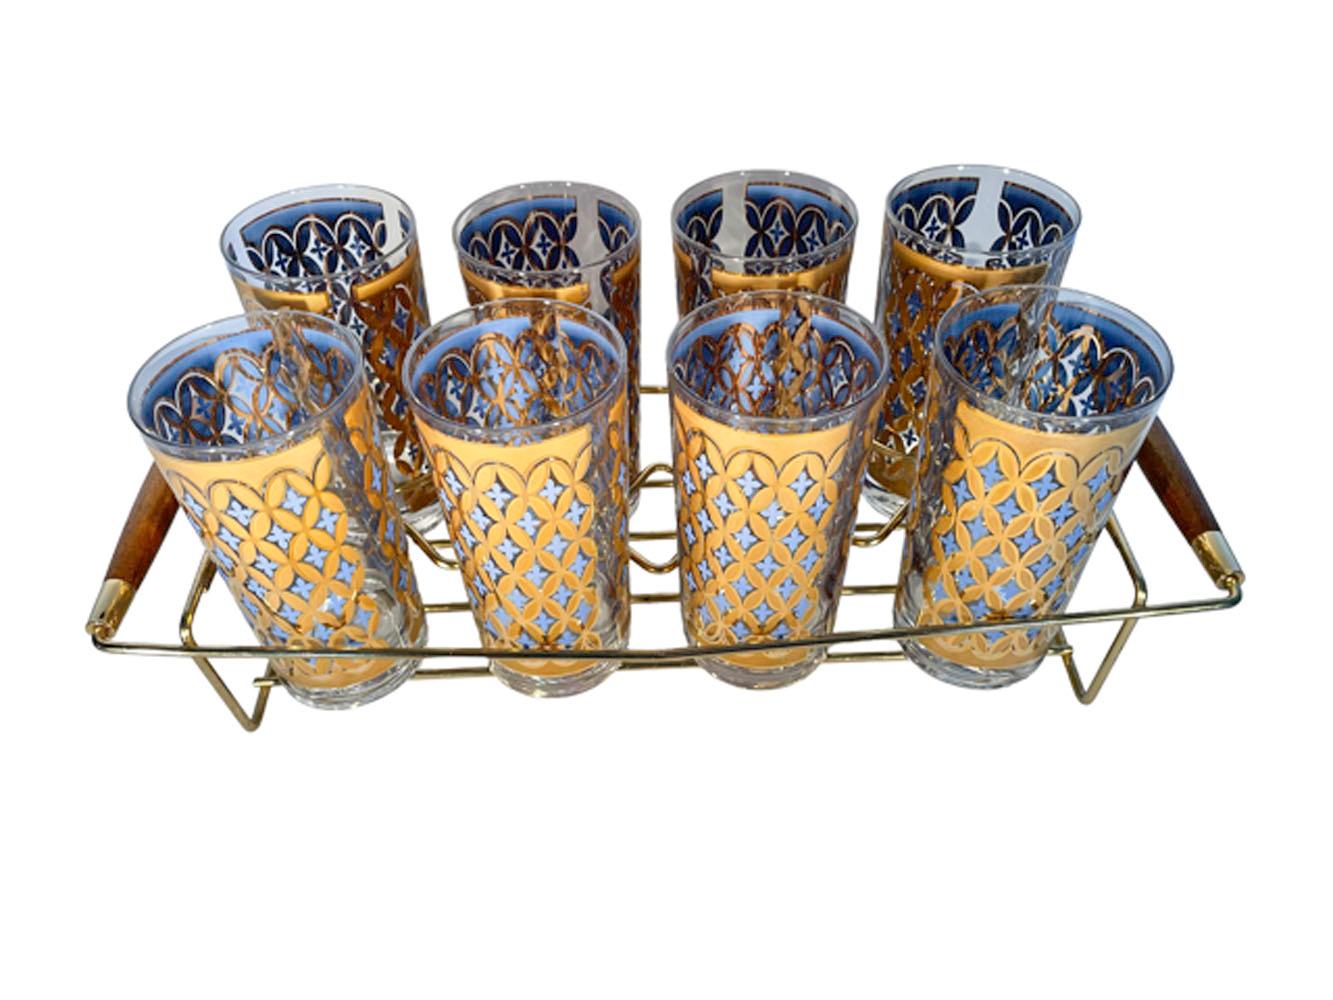 Eight Irene Pasinski designed highball glasses with high-gloss and satin finished overlapping 22 karat gold oval links with blue enamel four petaled flowers in the openings. On the interior the satin gold part of the design is covered by blue